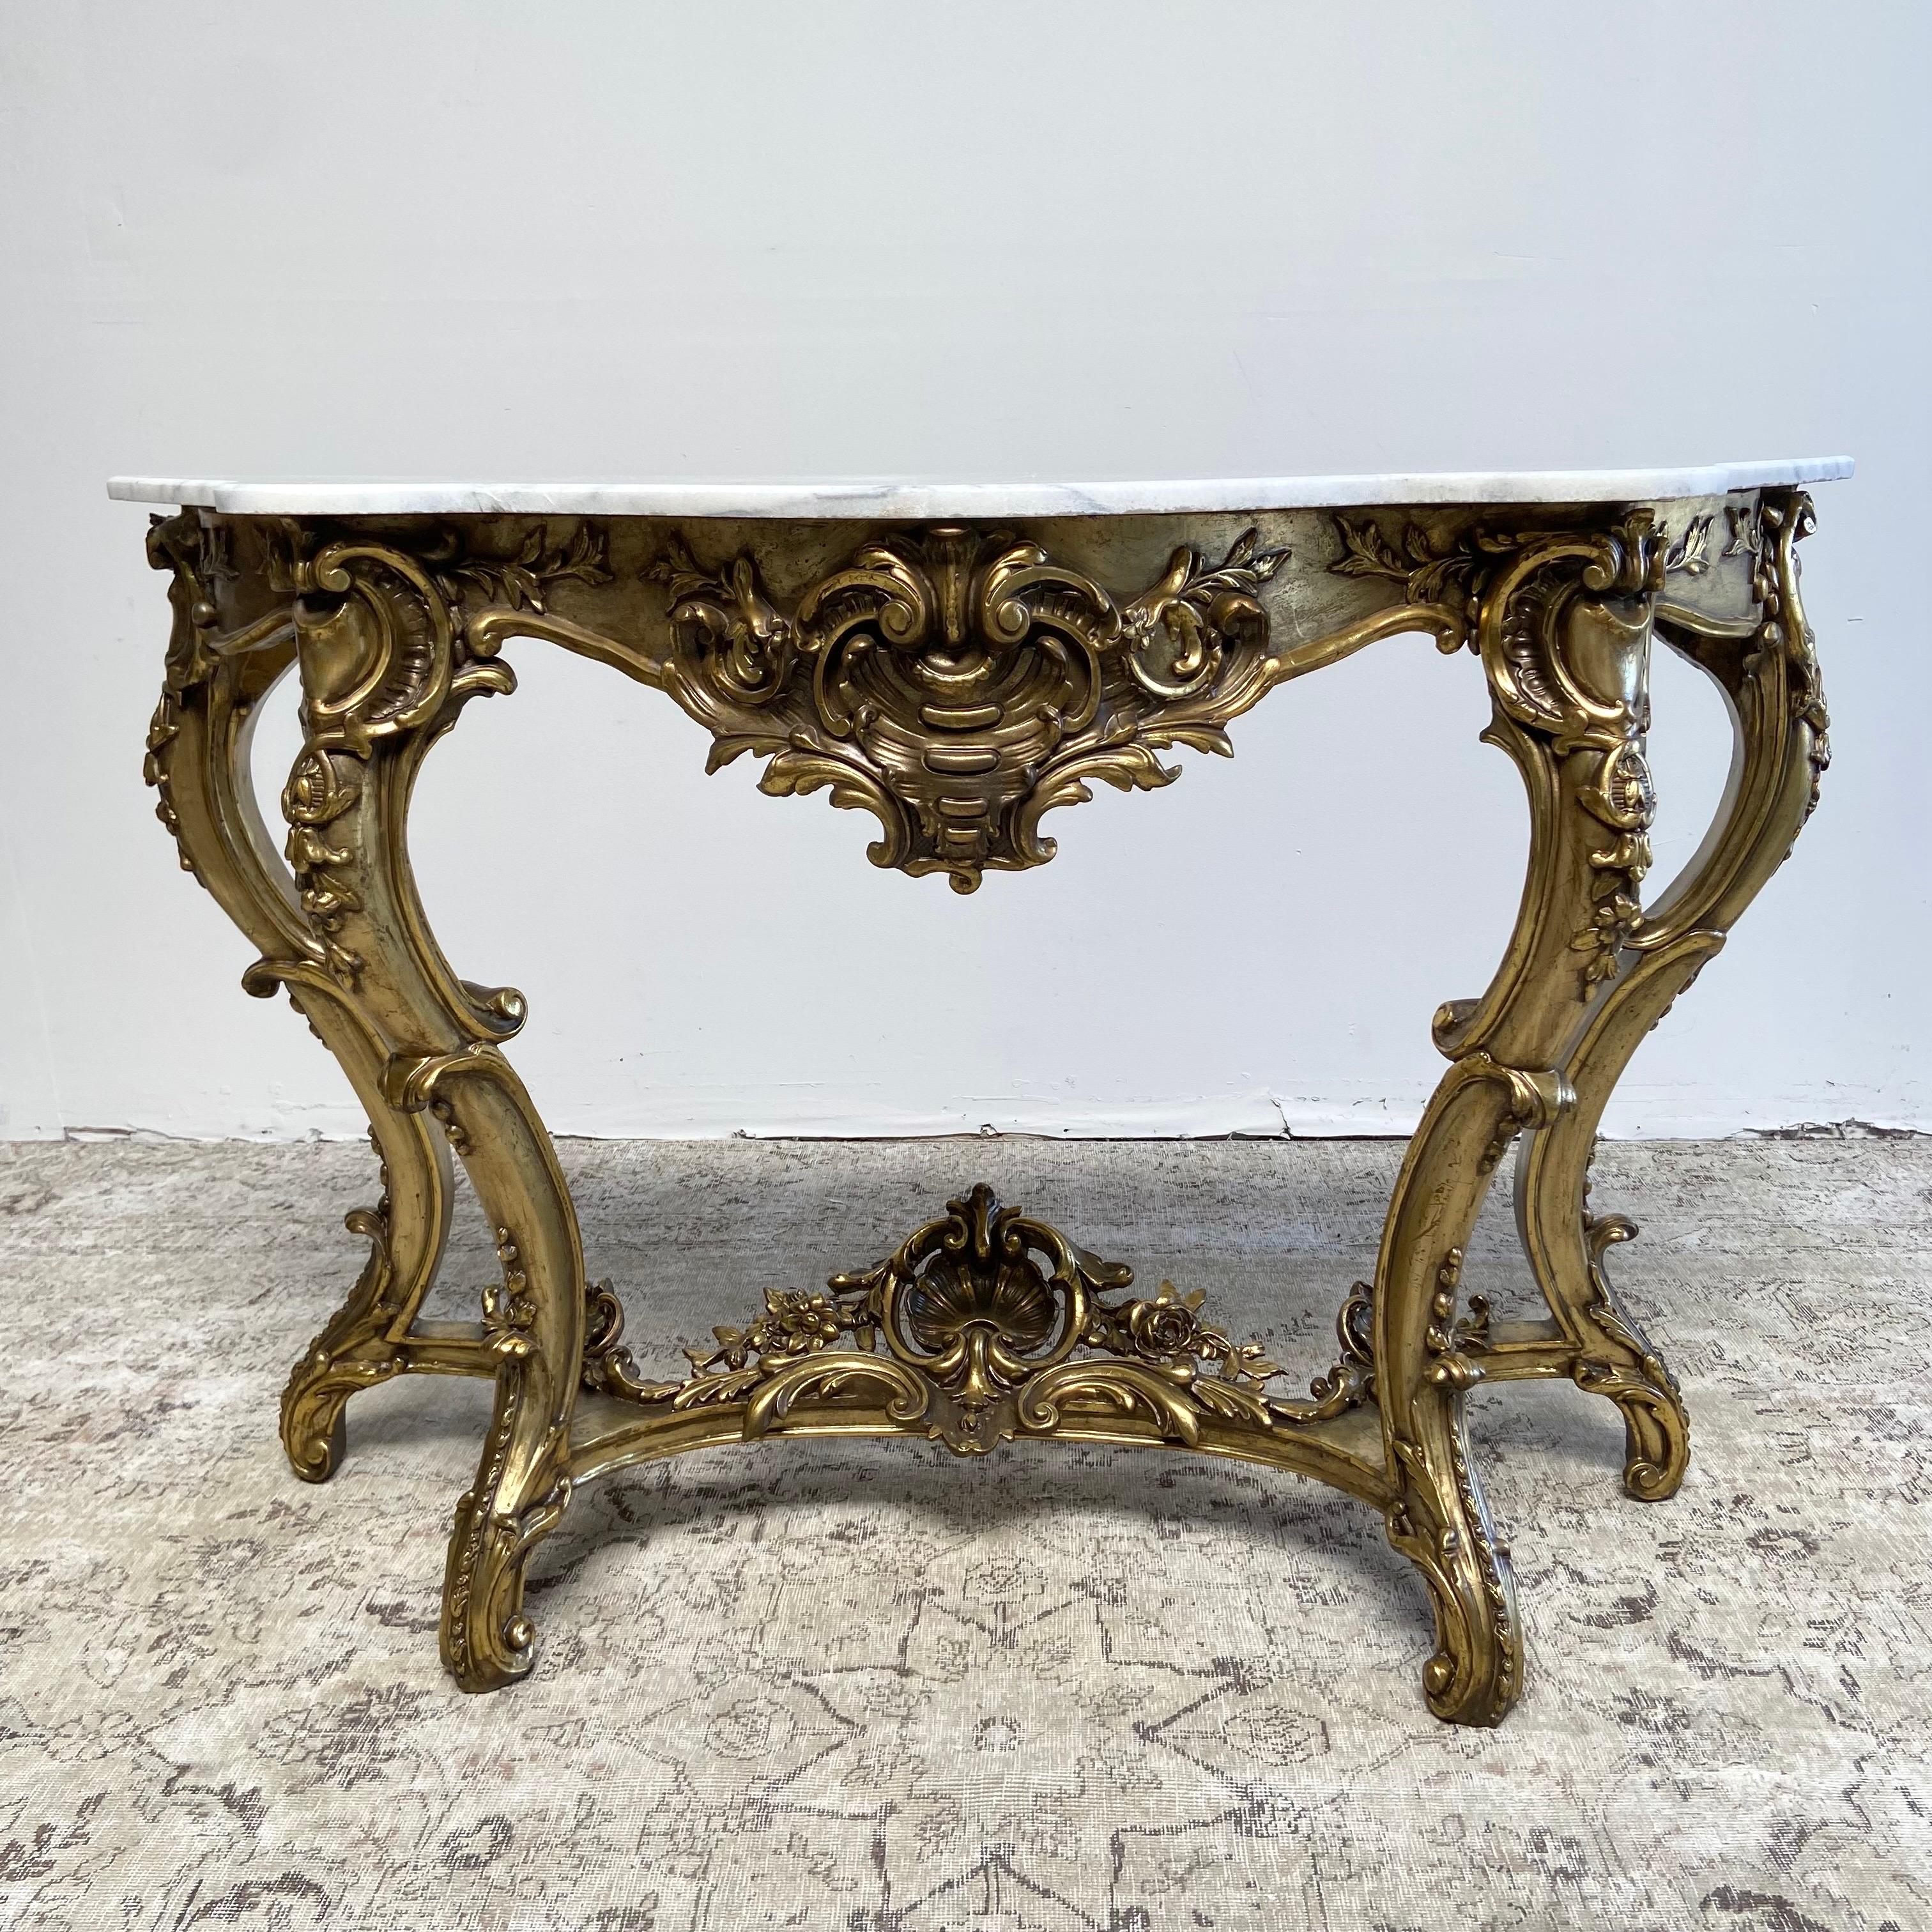 Free standing on 4 French Louis XV Style legs. A large cartouche with 3 large carved roses at the center of the stretchers, and highly carved florals on the front legs. Table has a dovetail construction. The marble top is a white color, with gray